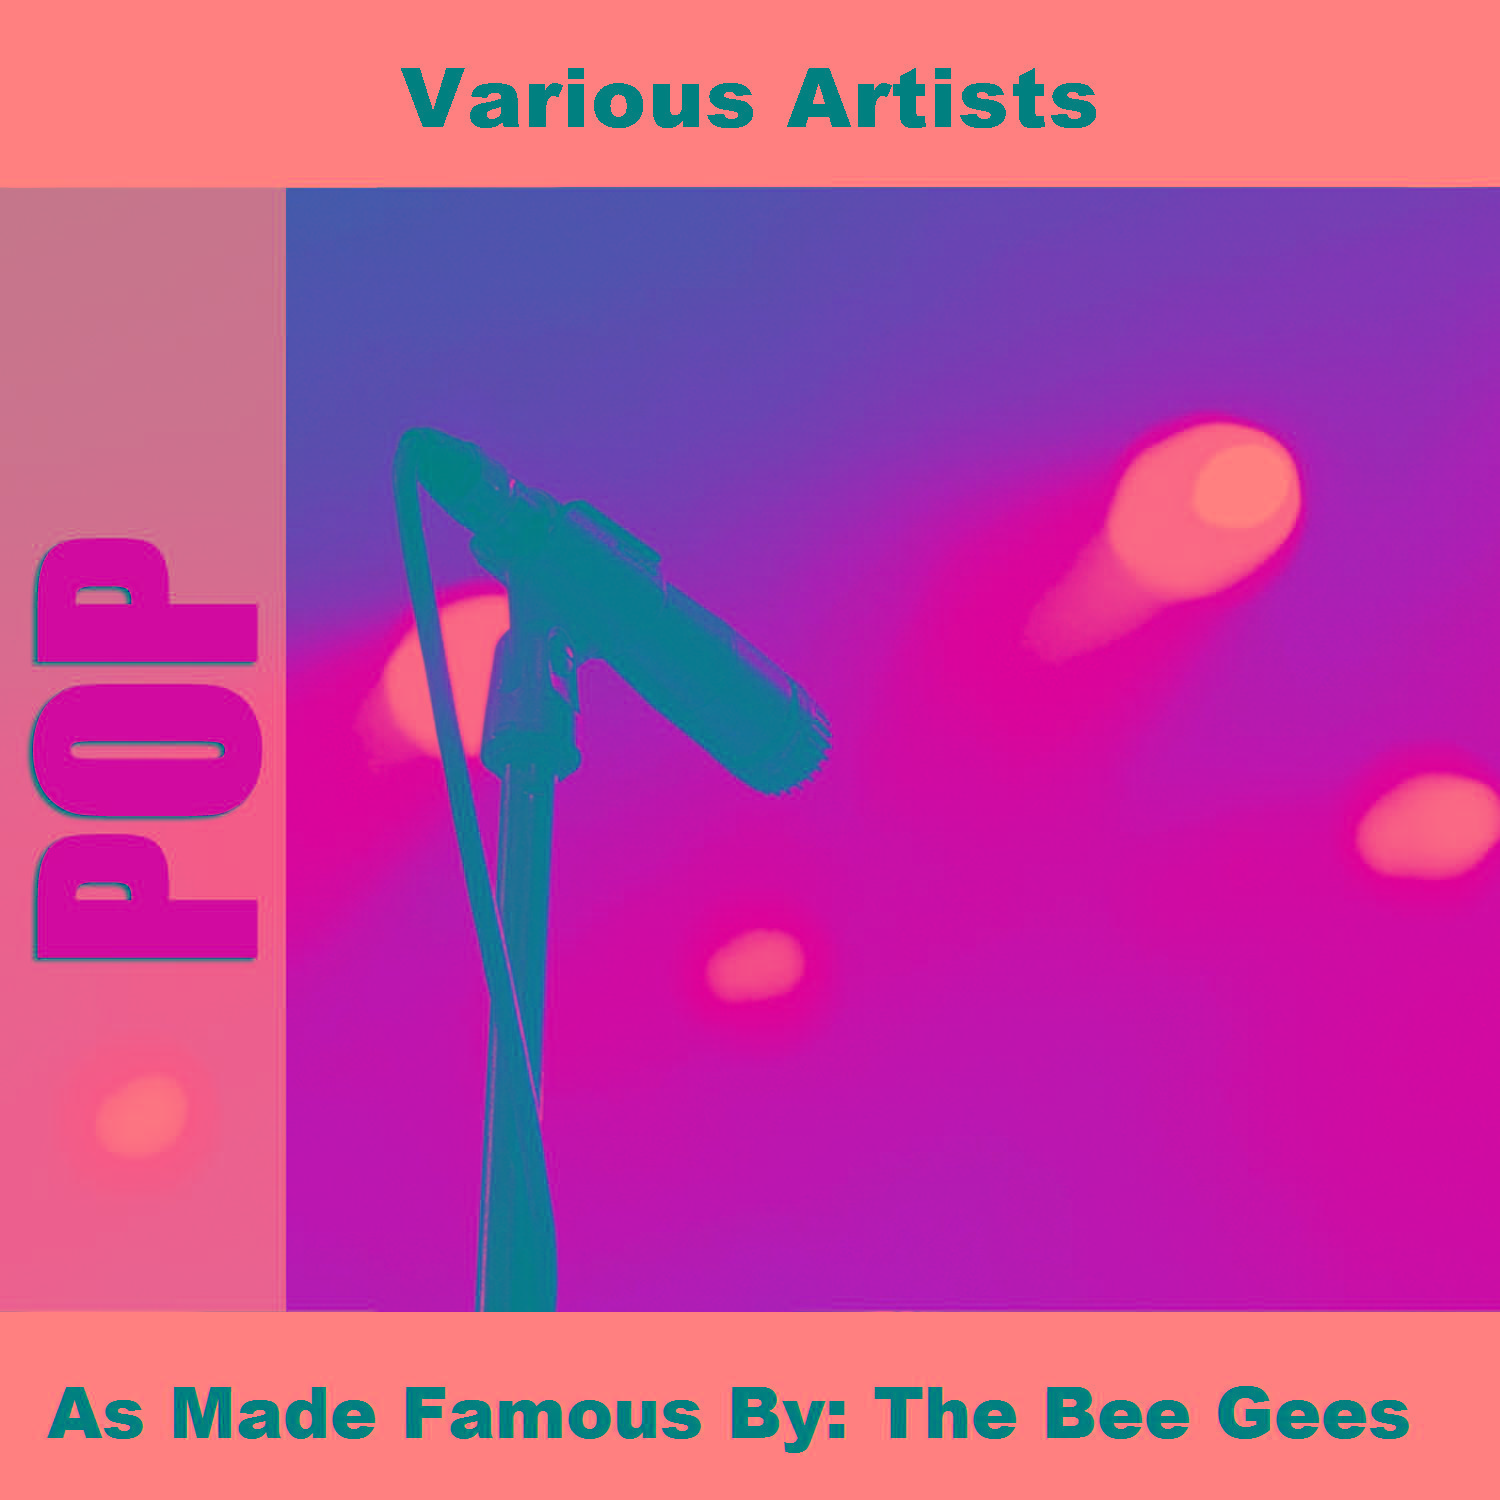 Stayin' Alive - Sound-A-Like As Made Famous By: The Bee Gees